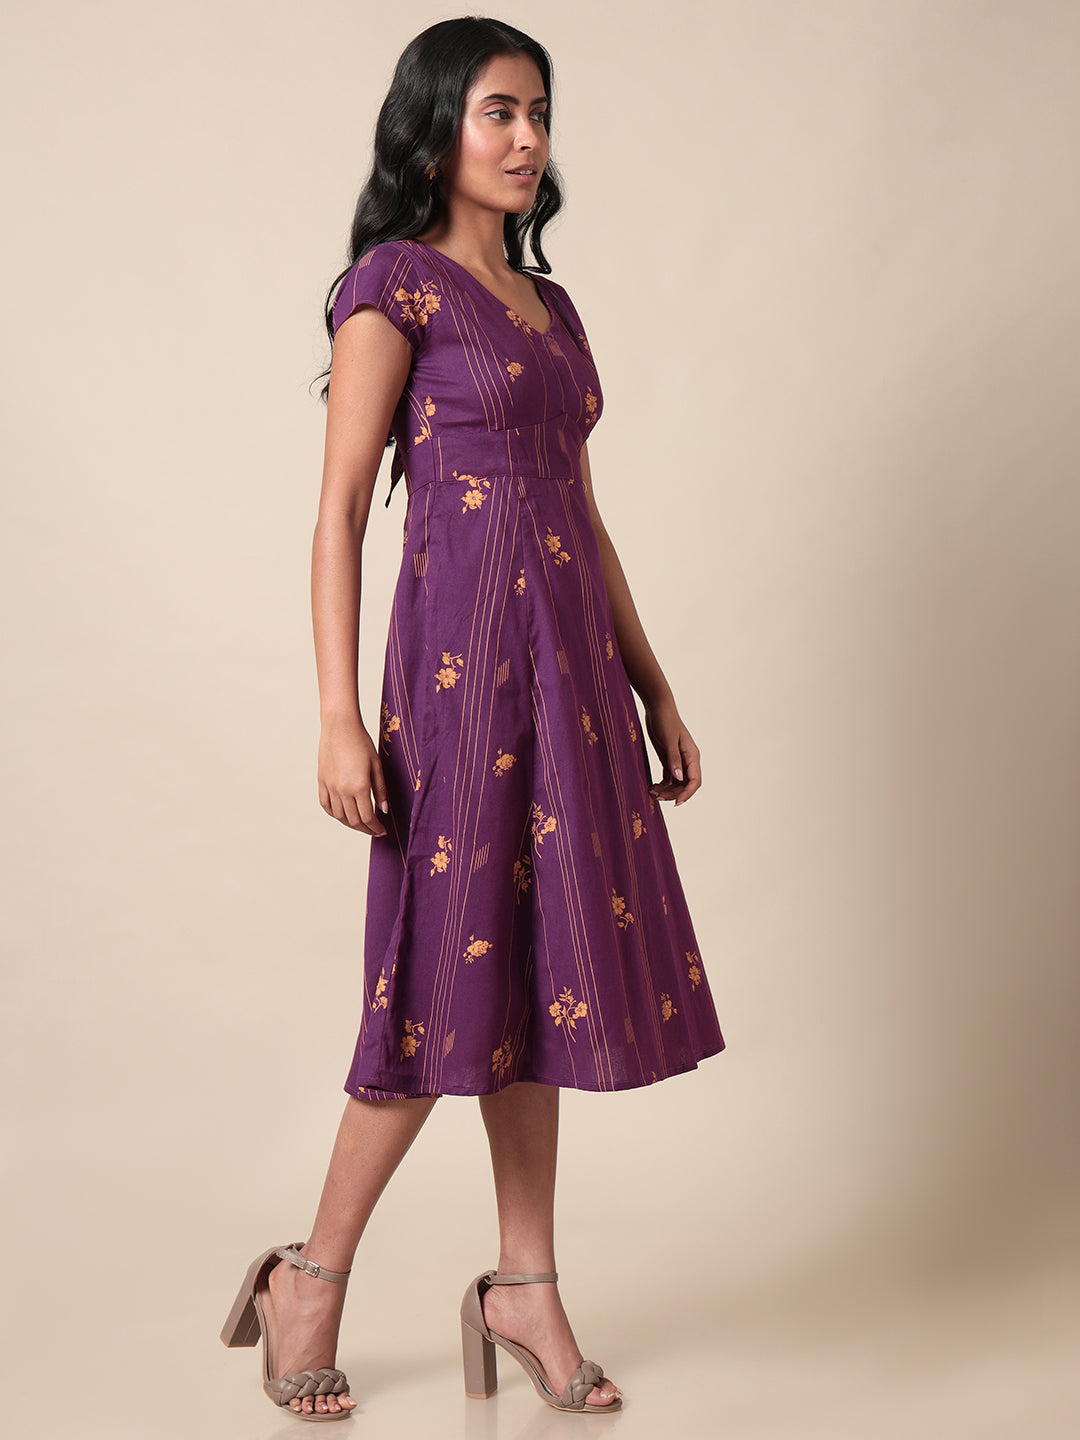 Bougainvillea Printed Purple Dress With Back Tie Up